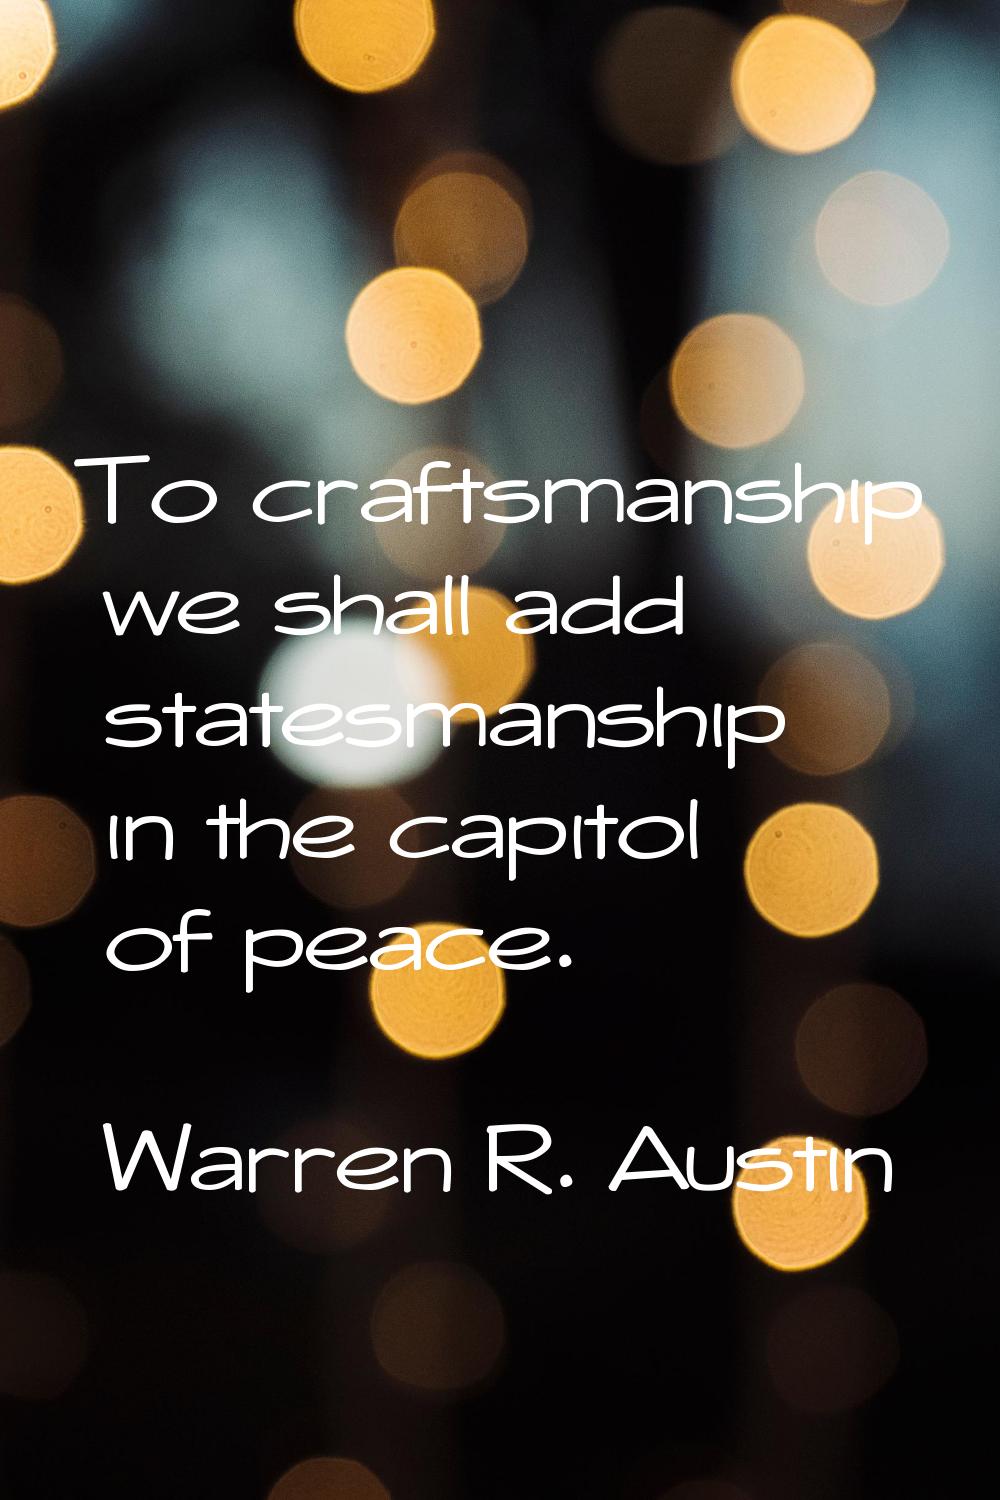 To craftsmanship we shall add statesmanship in the capitol of peace.